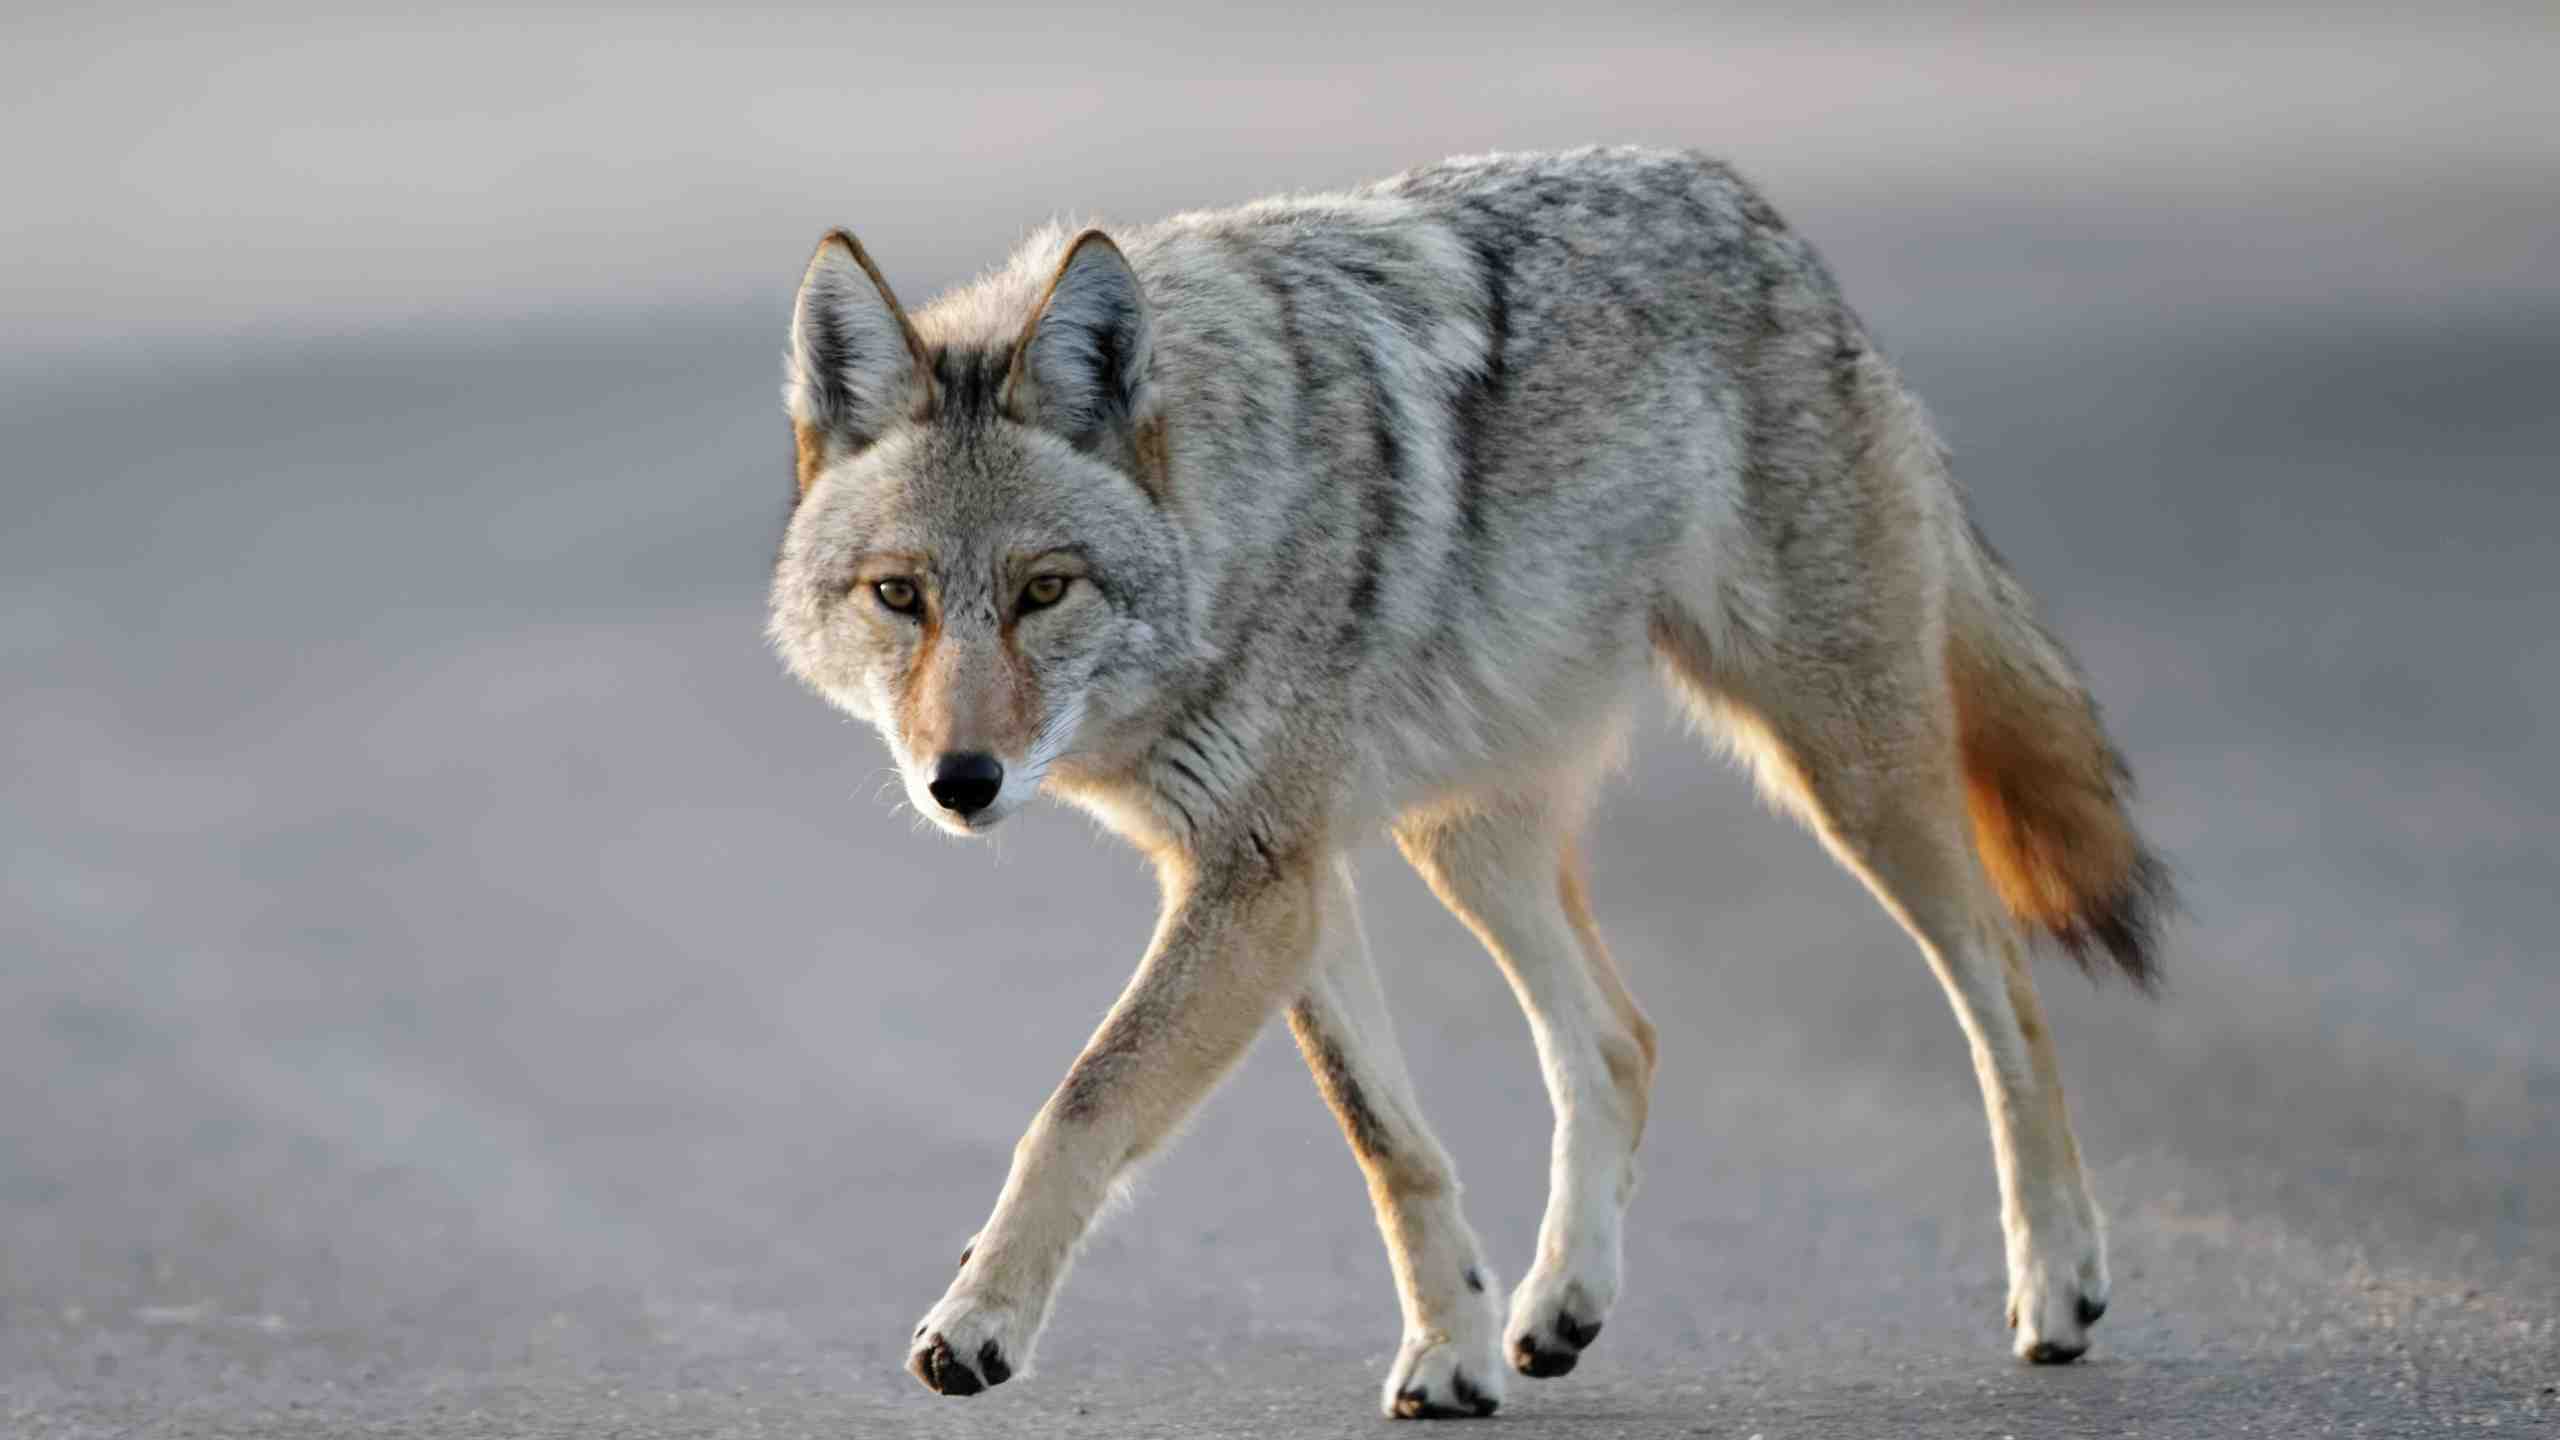 What to do if a coyote approaches you and your dog?